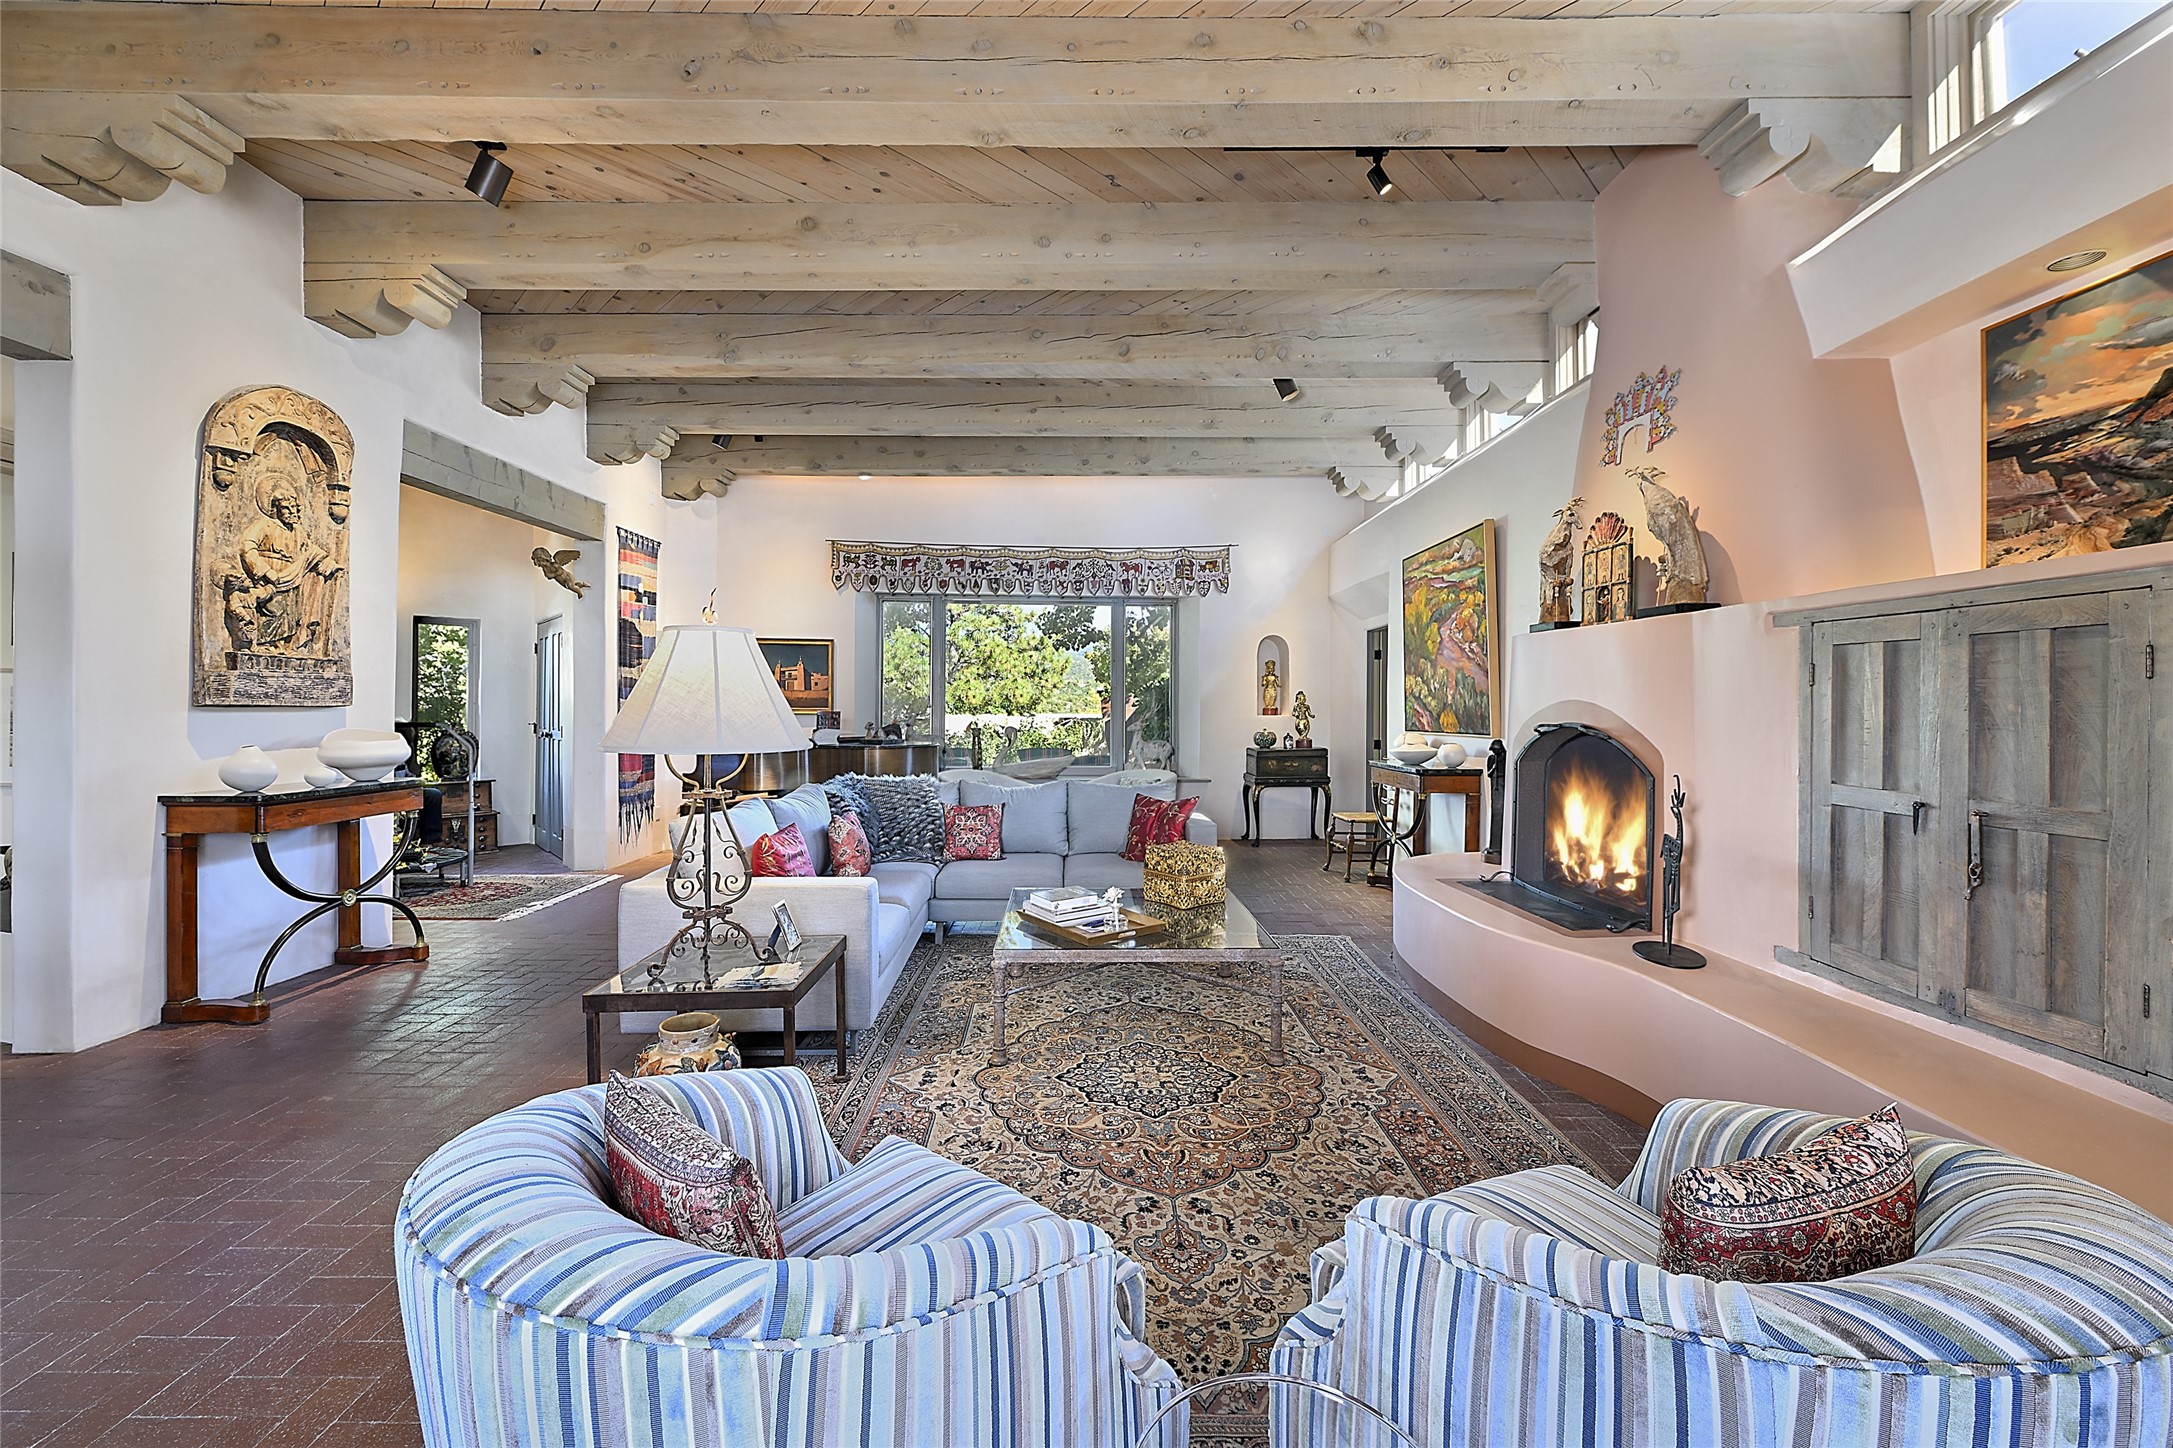 Exuding classical Santa Fe style, this magnificent living space has soaring ceilings with beams, corbels, and clerestories;